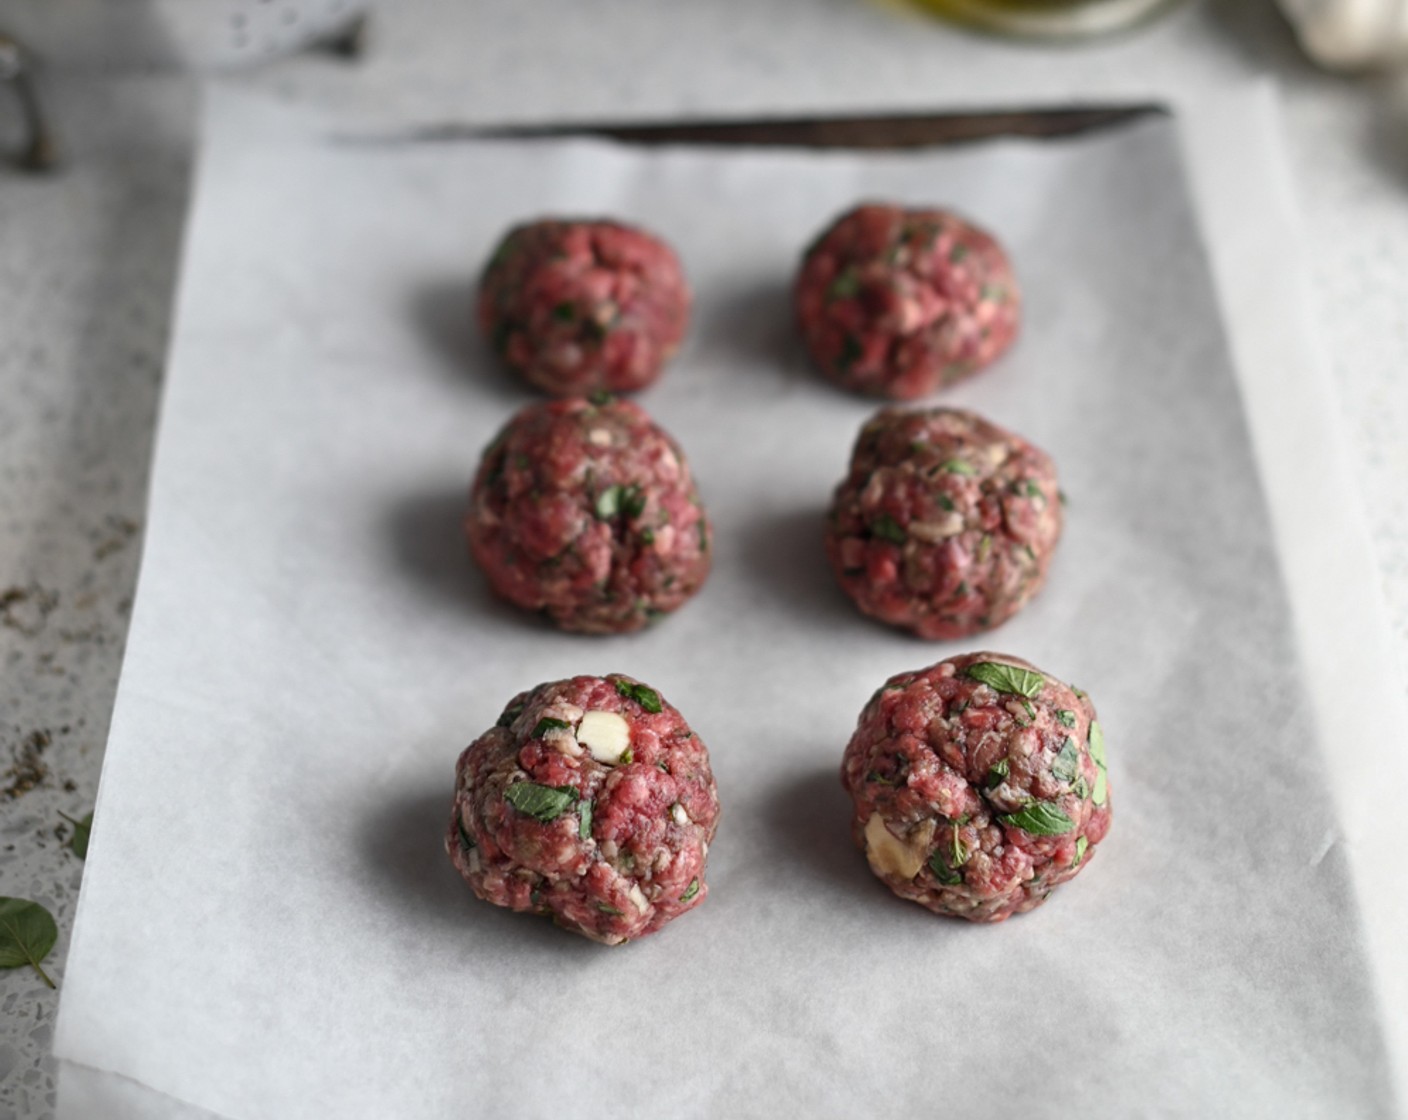 step 4 Form the mixture into 6-12 large meatballs and arrange them on a lined baking sheet.